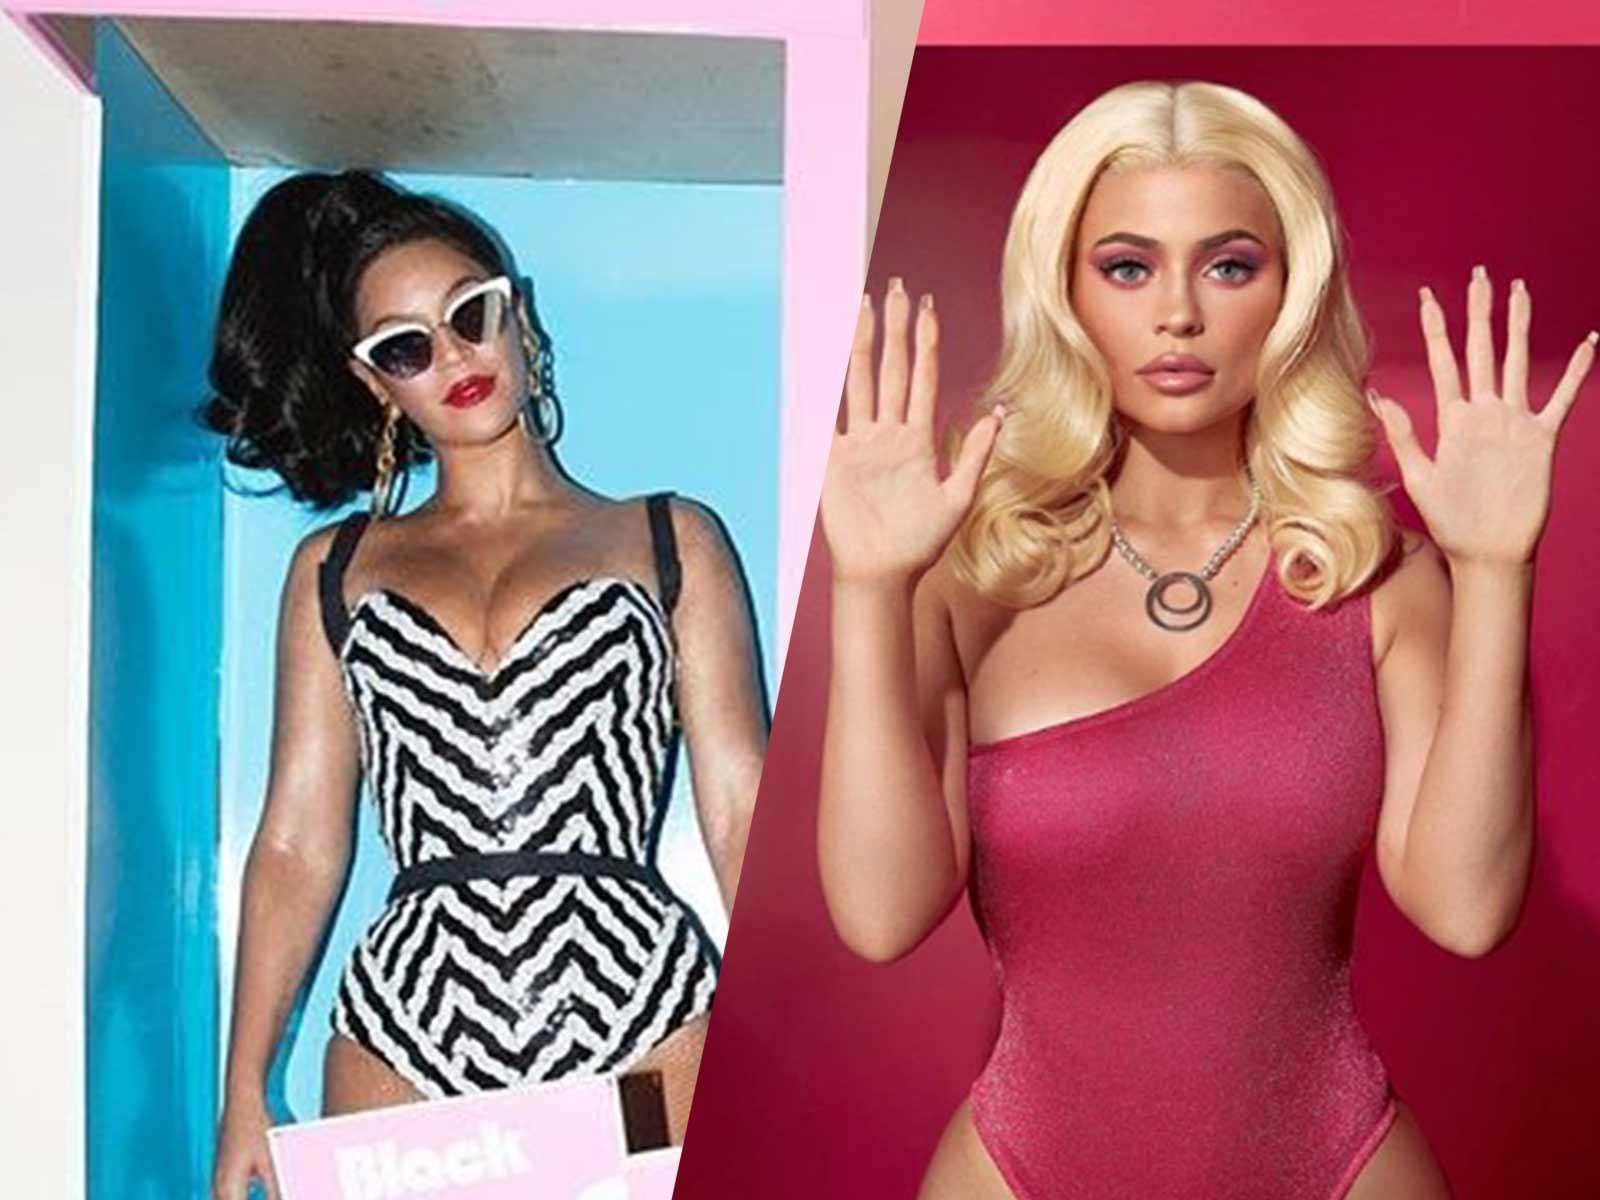 Beyoncé vs. Kylie Jenner: Which Barbie Would You Add to Your Collection?